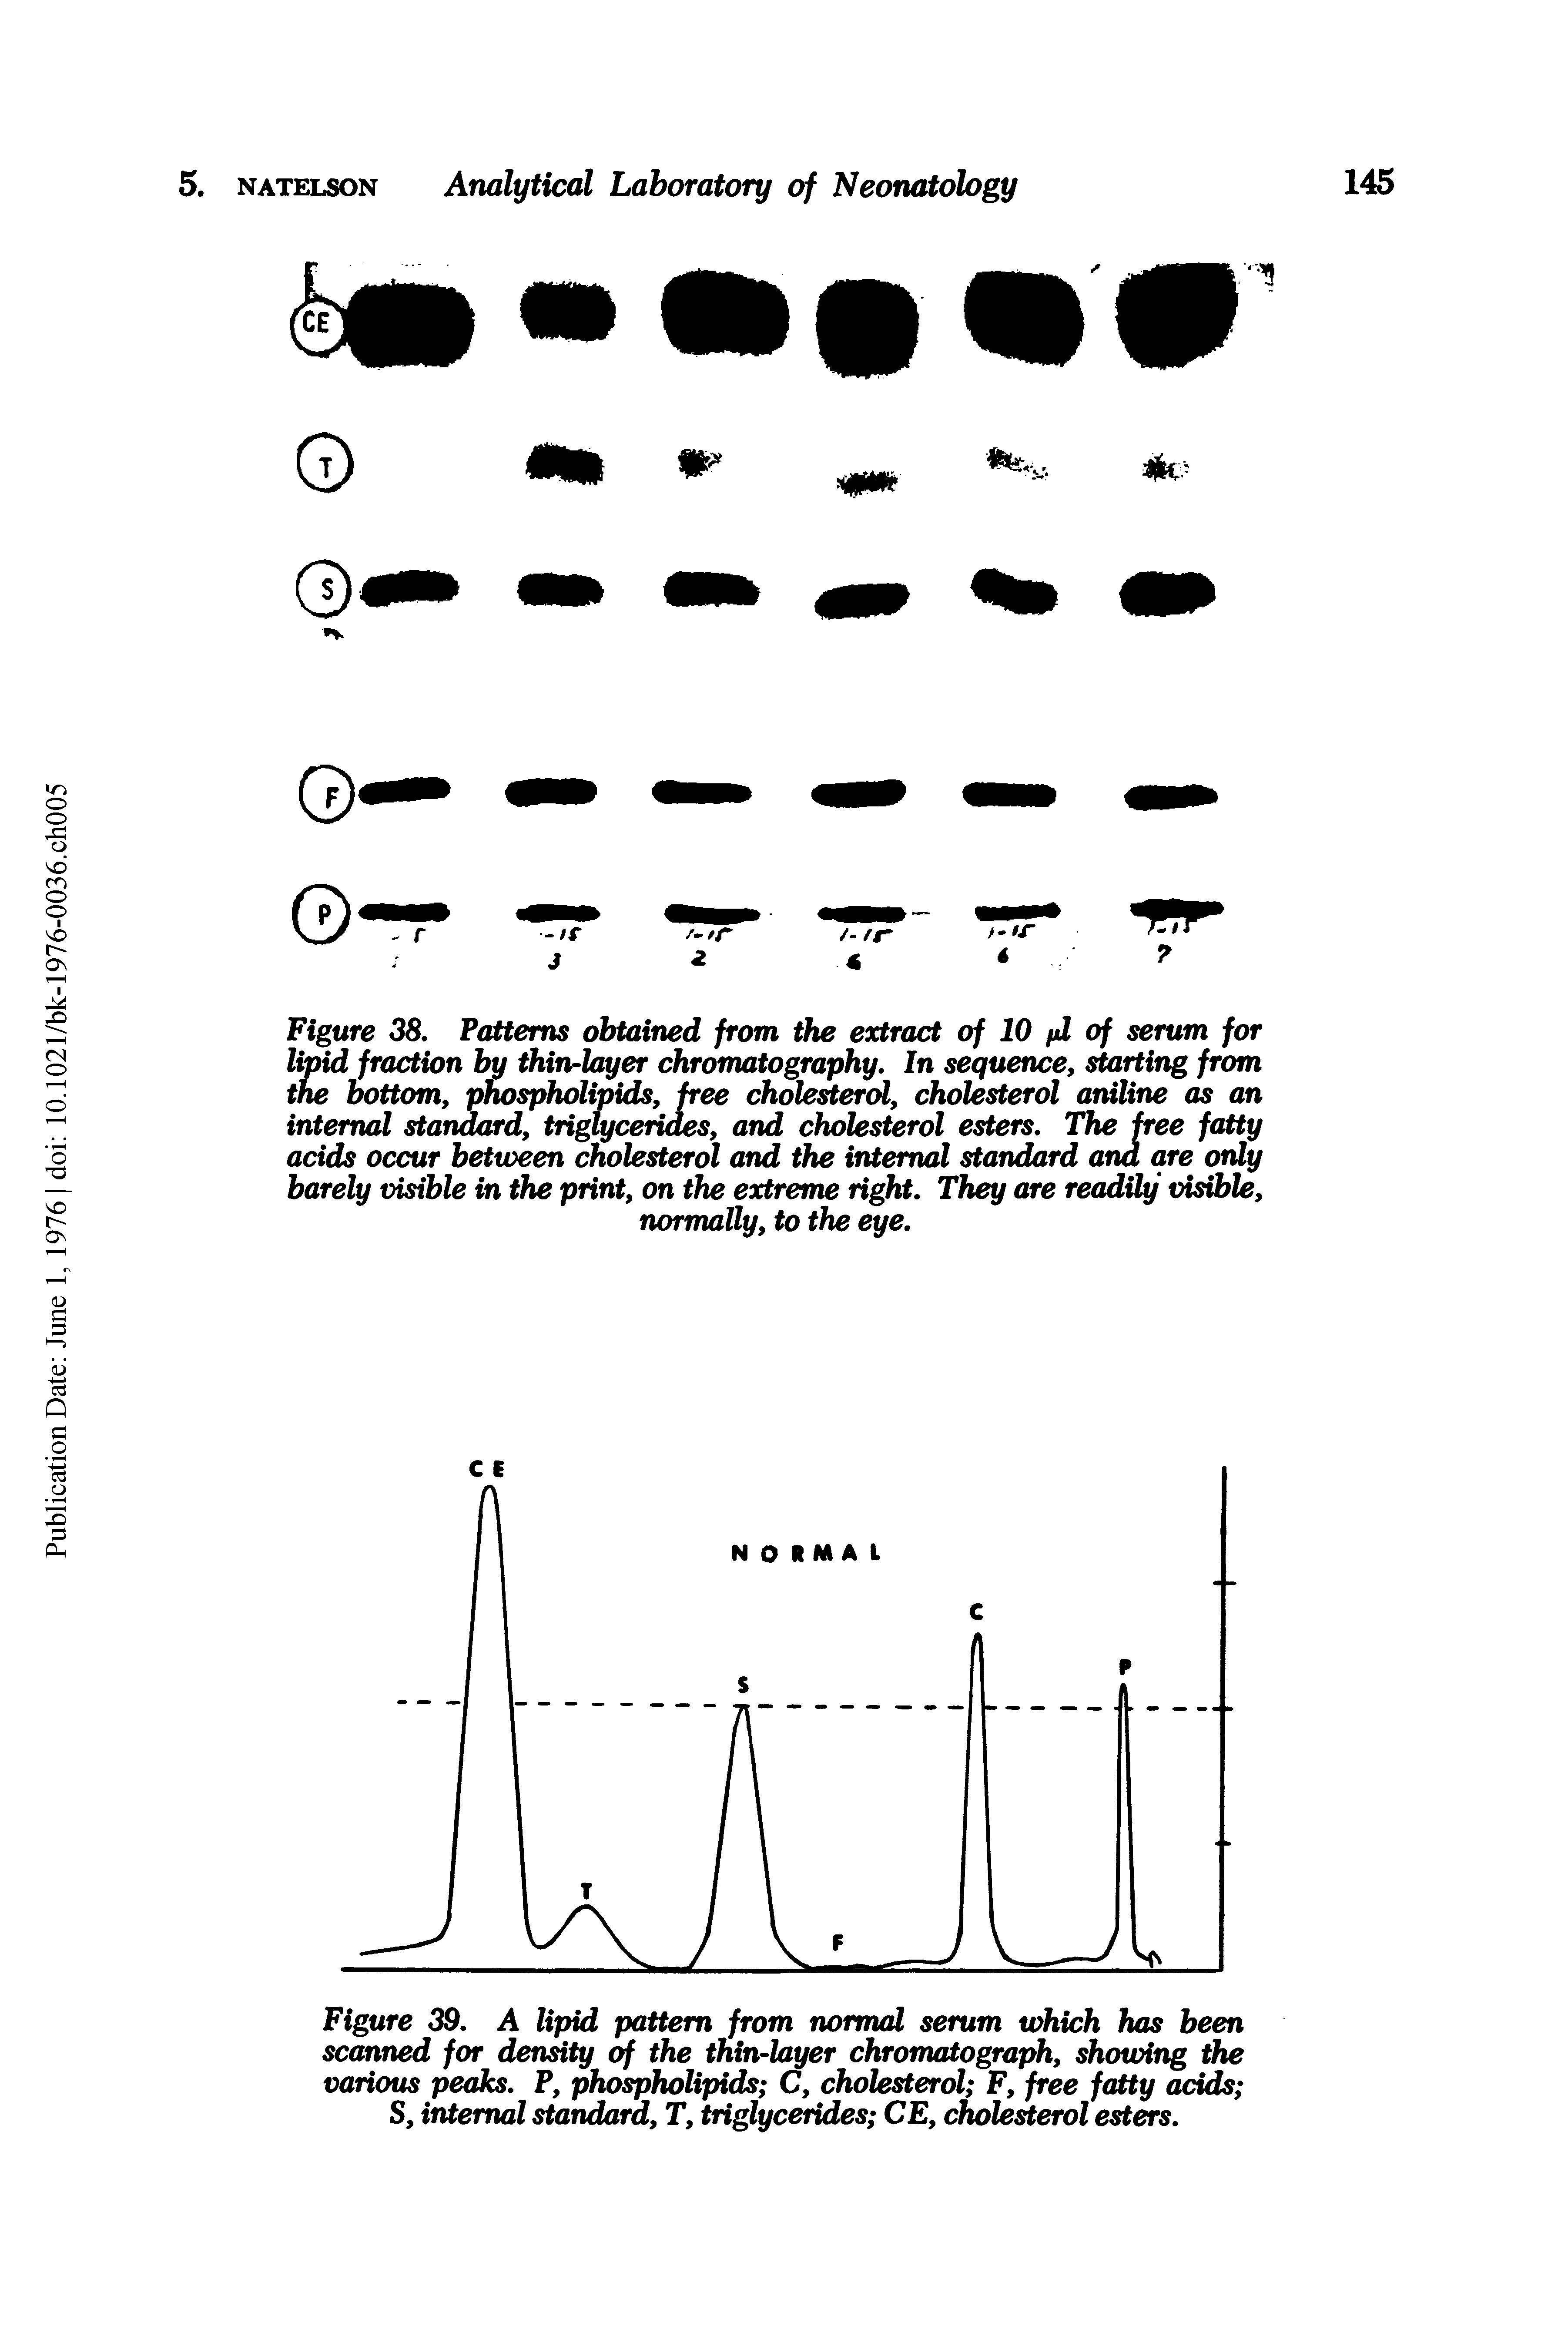 Figure 39, A lipid pattern from normal serum which has been scanned for density of the thin-layer chromatograph, showing the various peaks, P, phospholipids C, cholesterol F, free fatty acids S, internal standard, T, triglycerides CE, cholesterol esters.